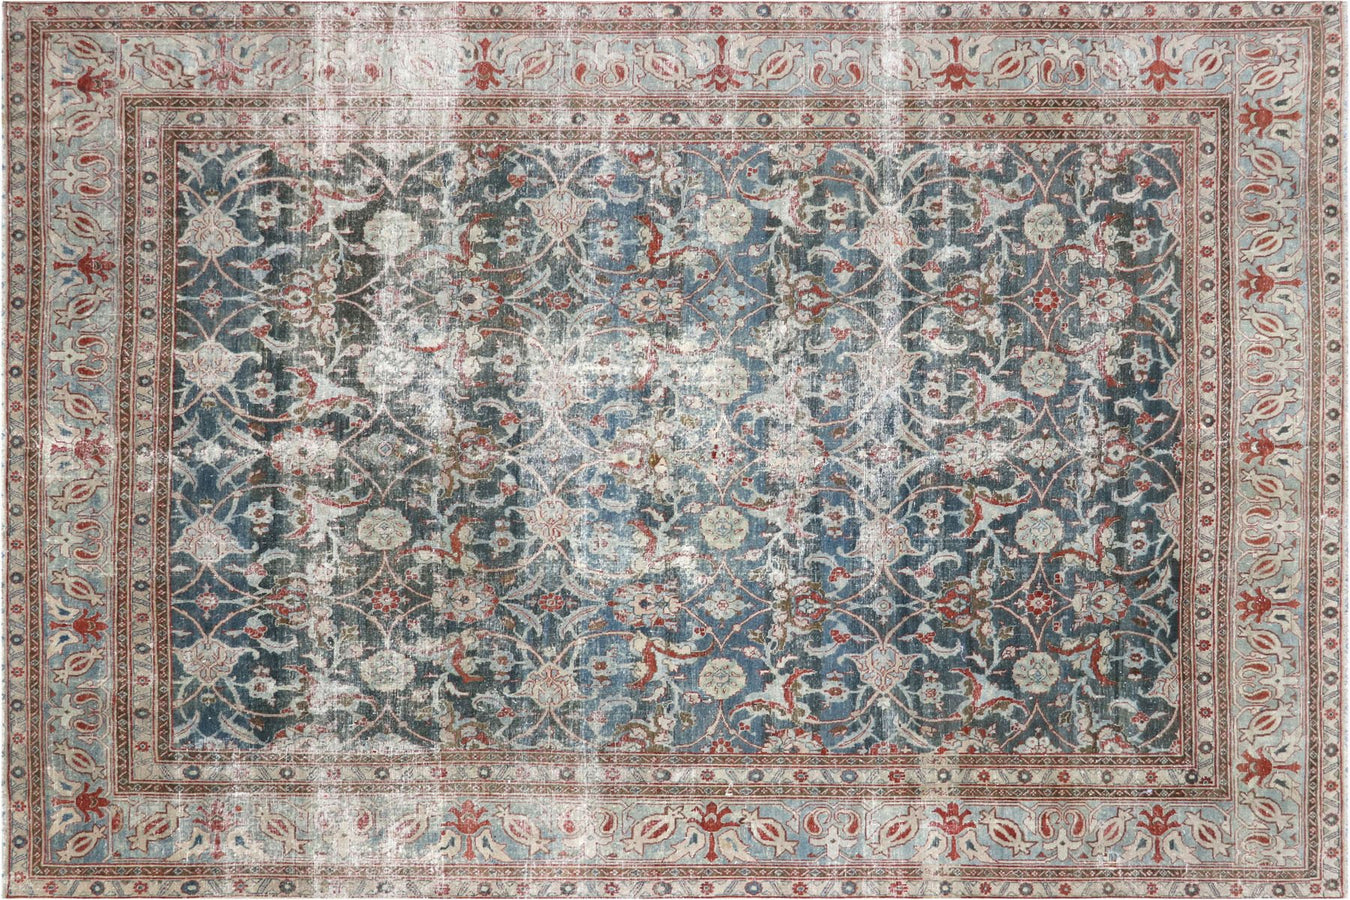 Vintage handwoven rugs with traditional and transitional designs that have been manually distressed.